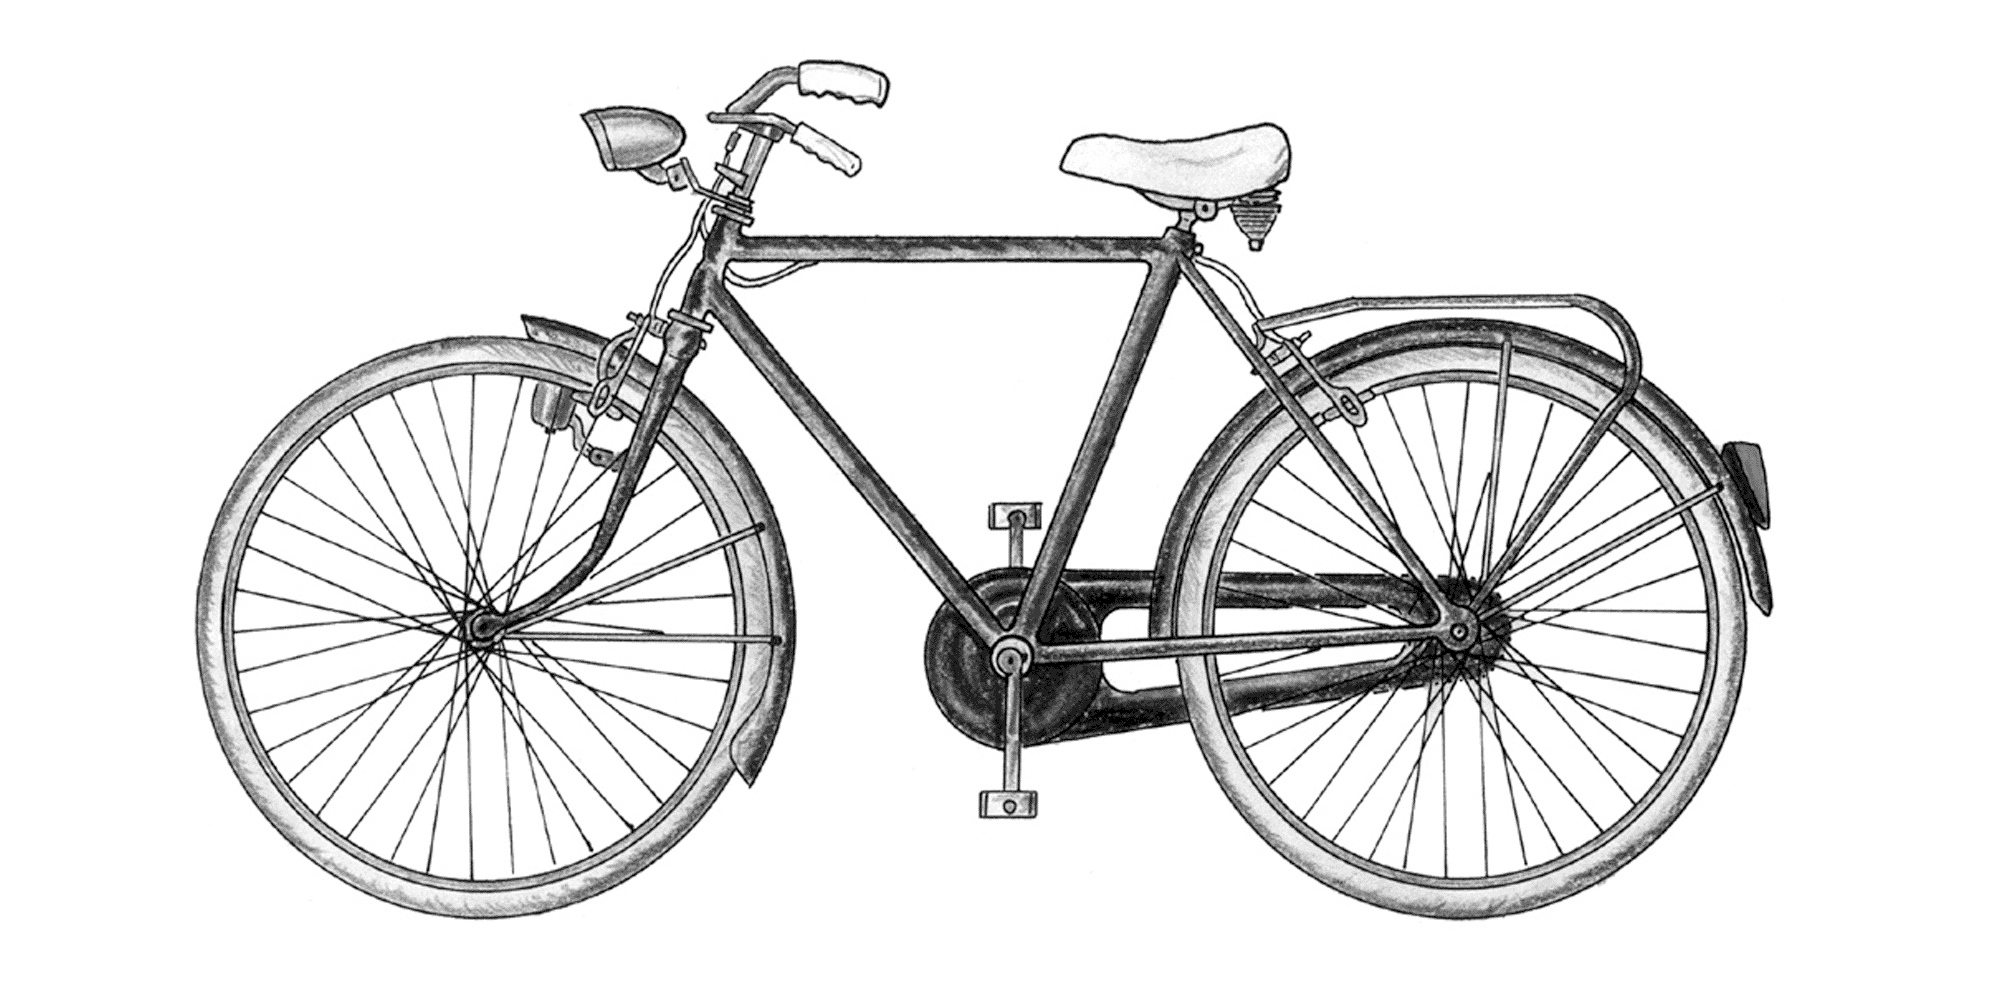 Bianchi Orthographic Projection